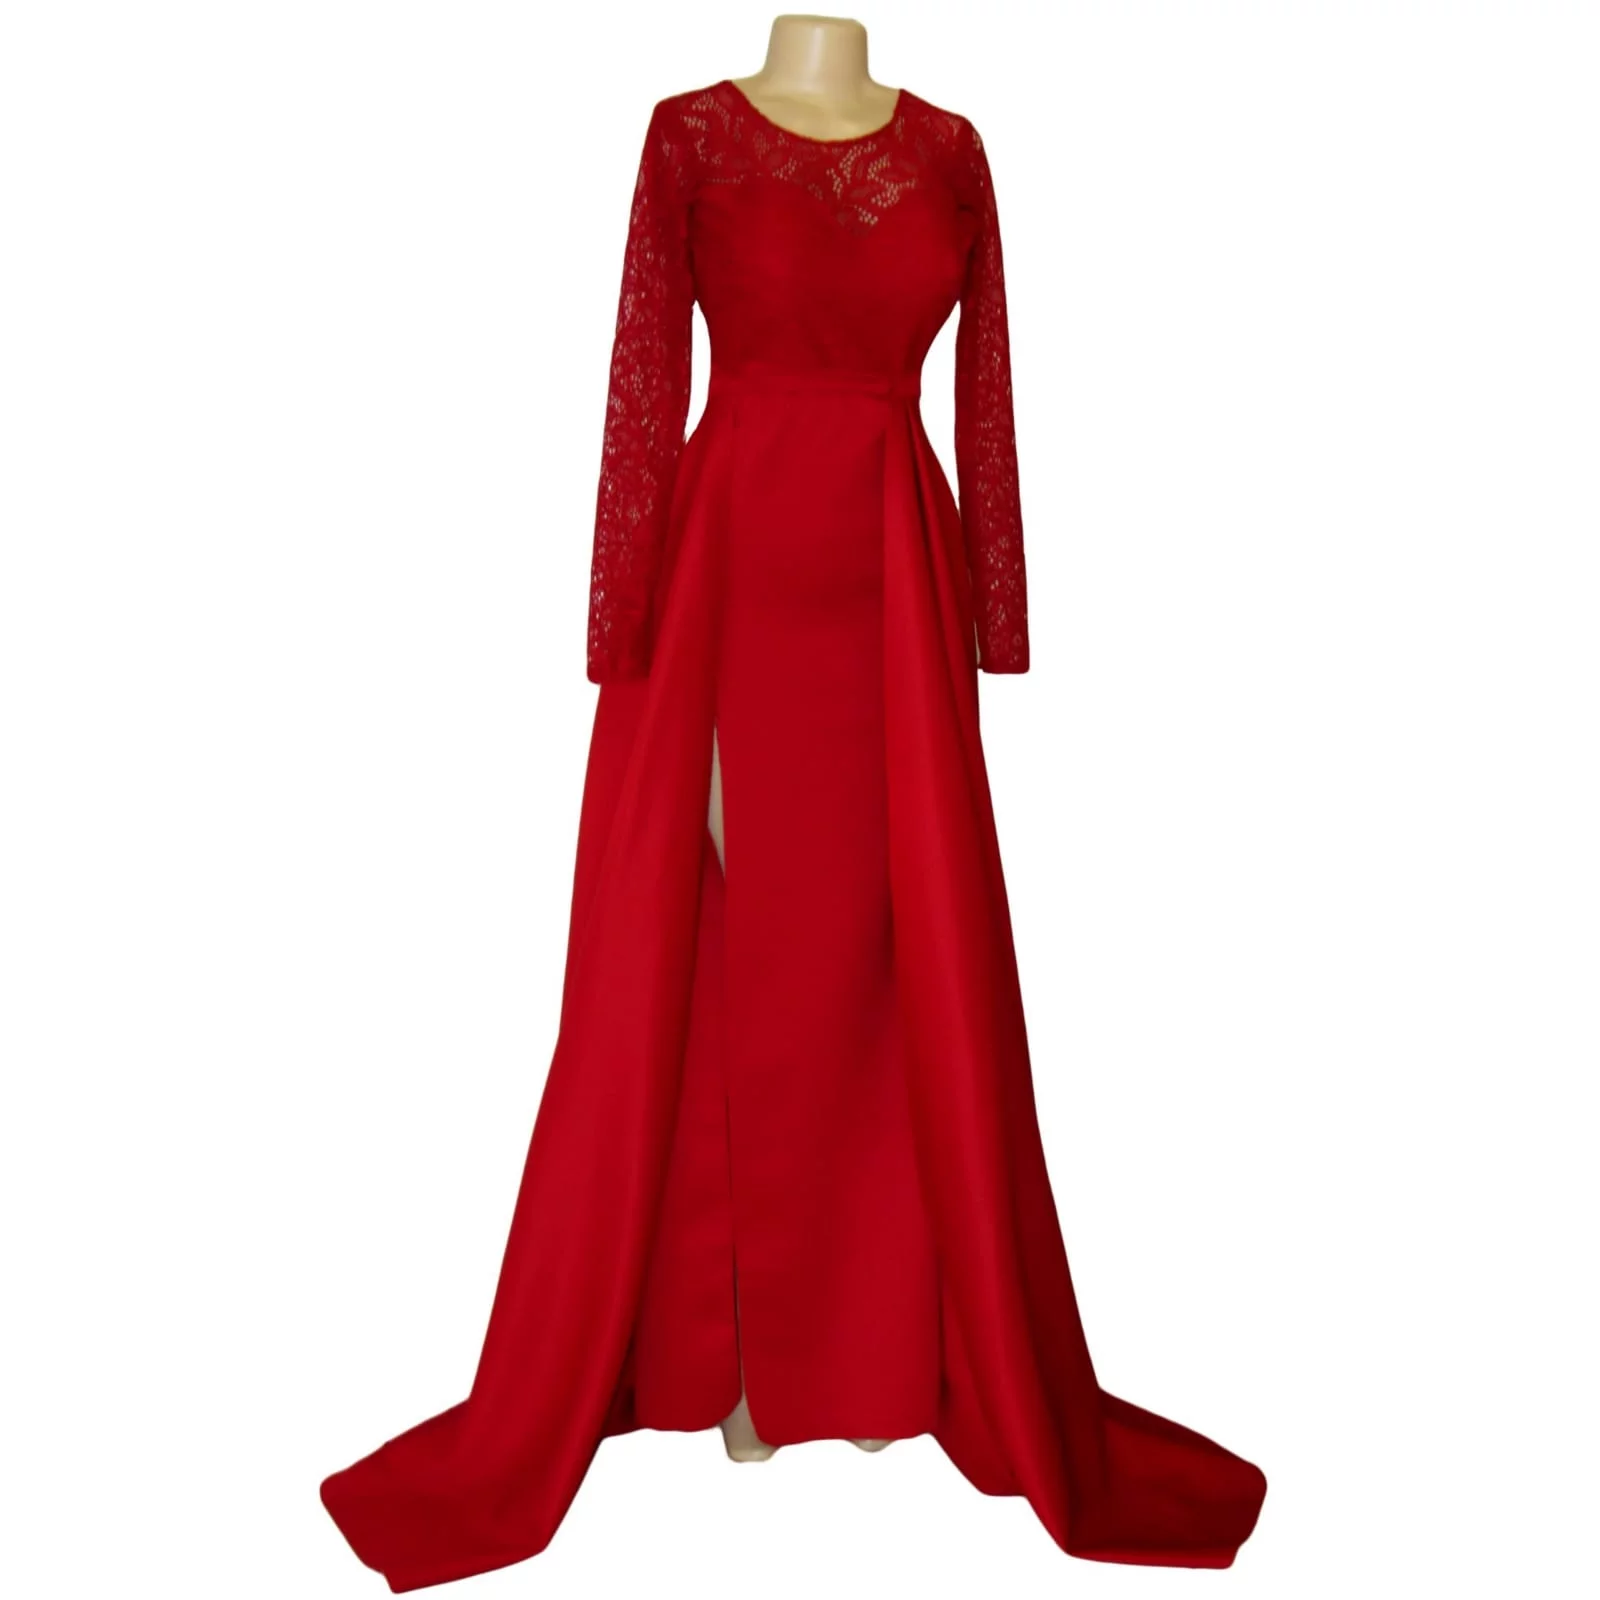 Straight cut deep red open back gala dress 6 straight cut deep red open back gala dress. With a lace bodice, long lace sleeves and a slit. With a detachable train.